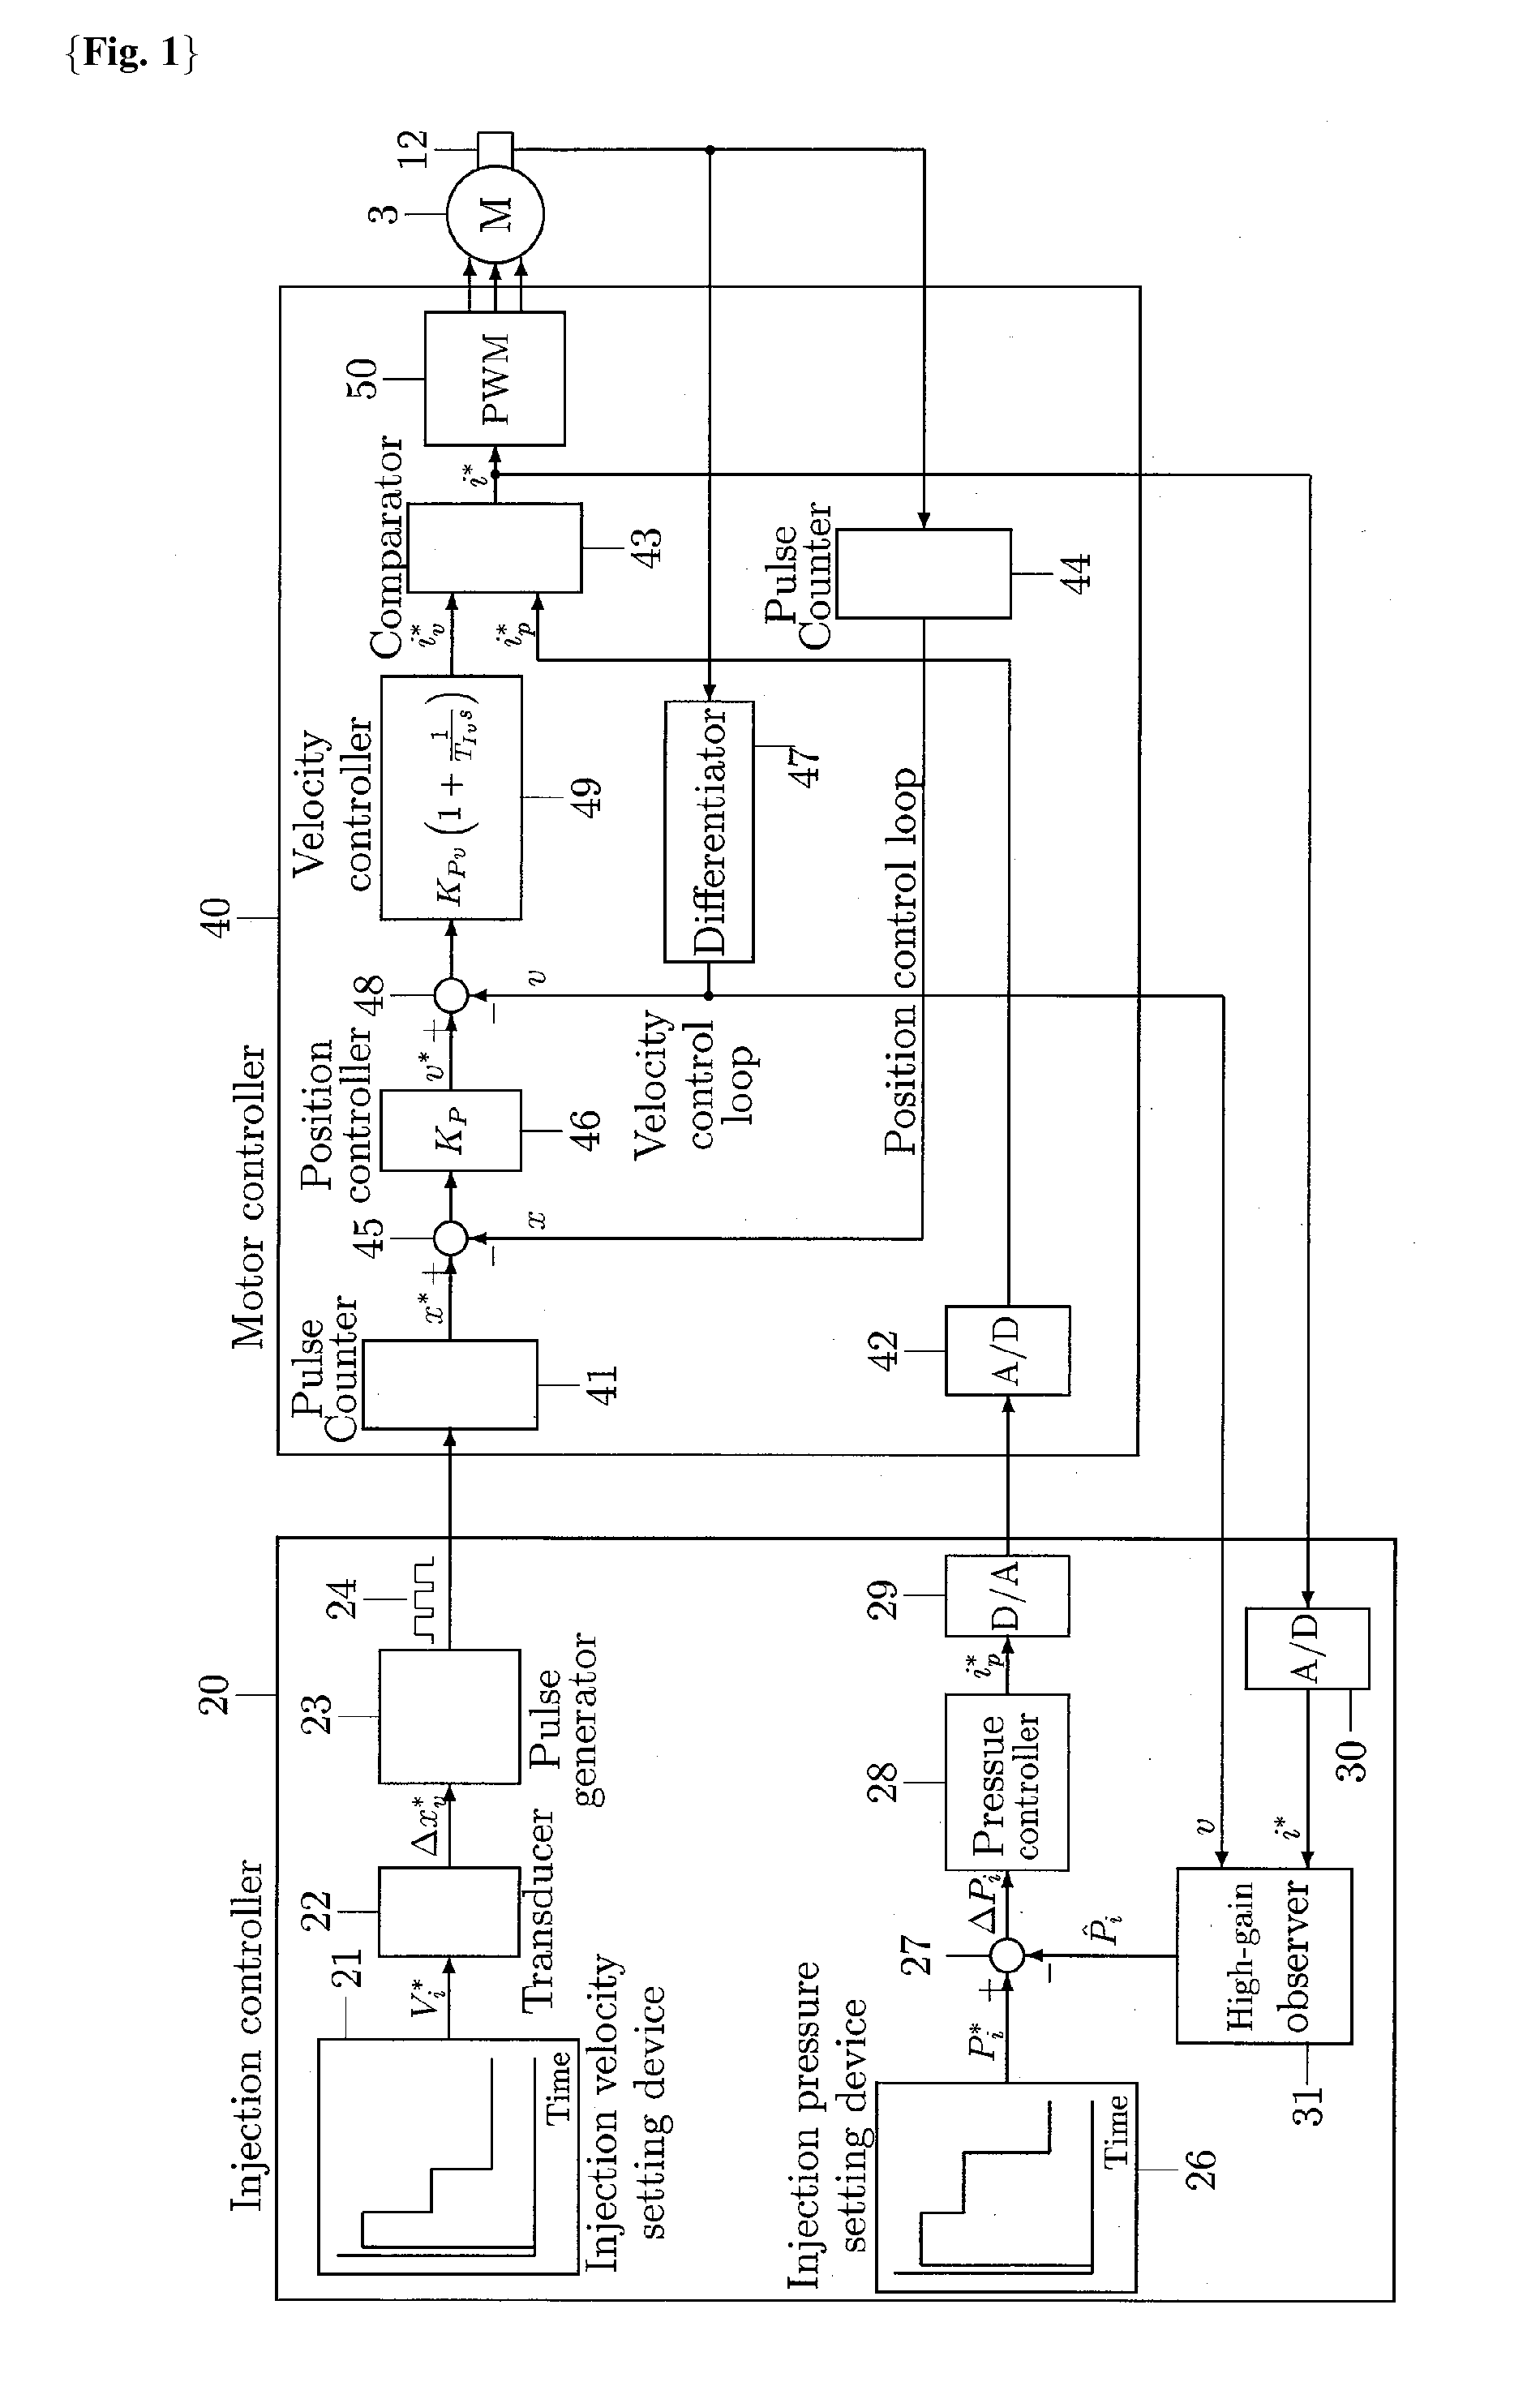 Device and Method for Pressure Control of Electric Injection Molding Machine